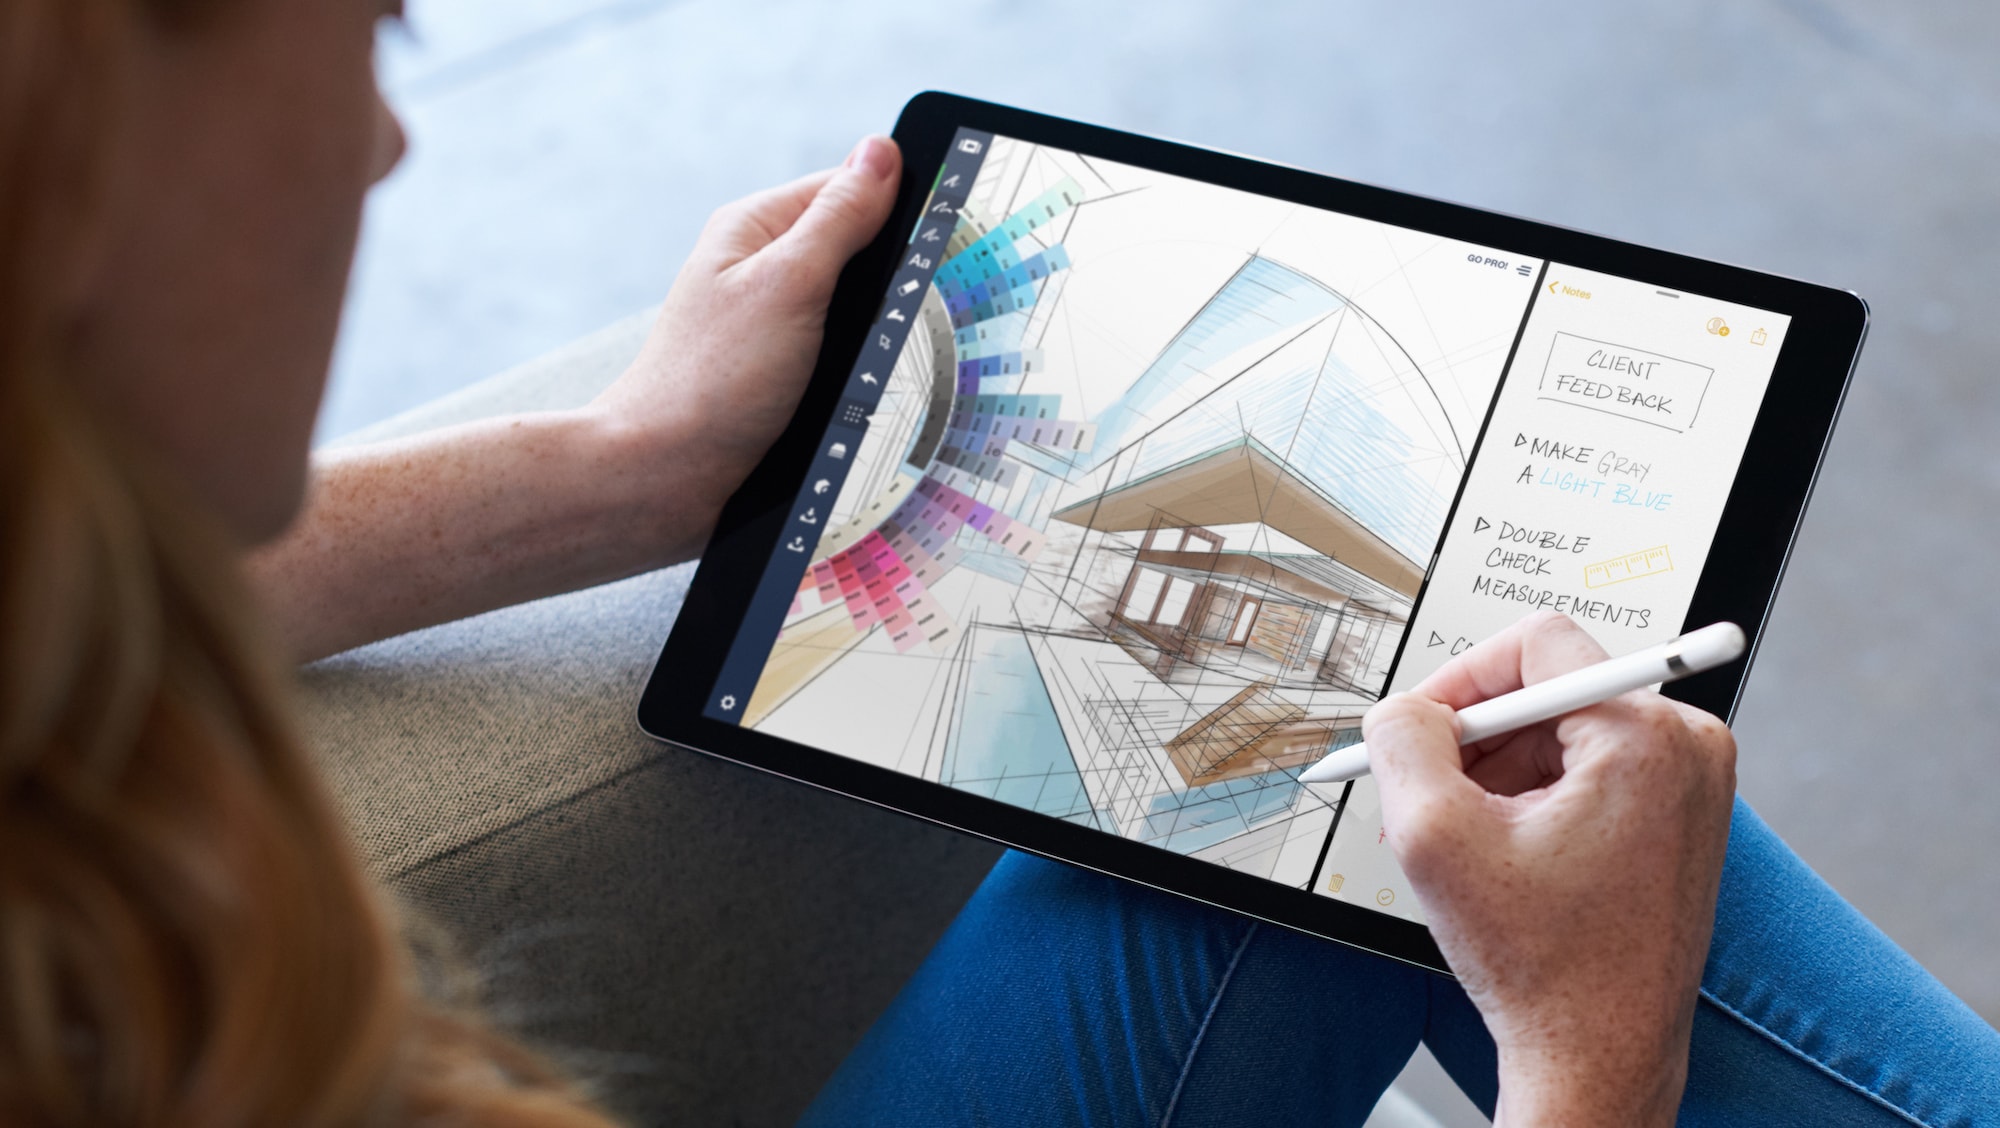 Multitasking and the Apple Pencil